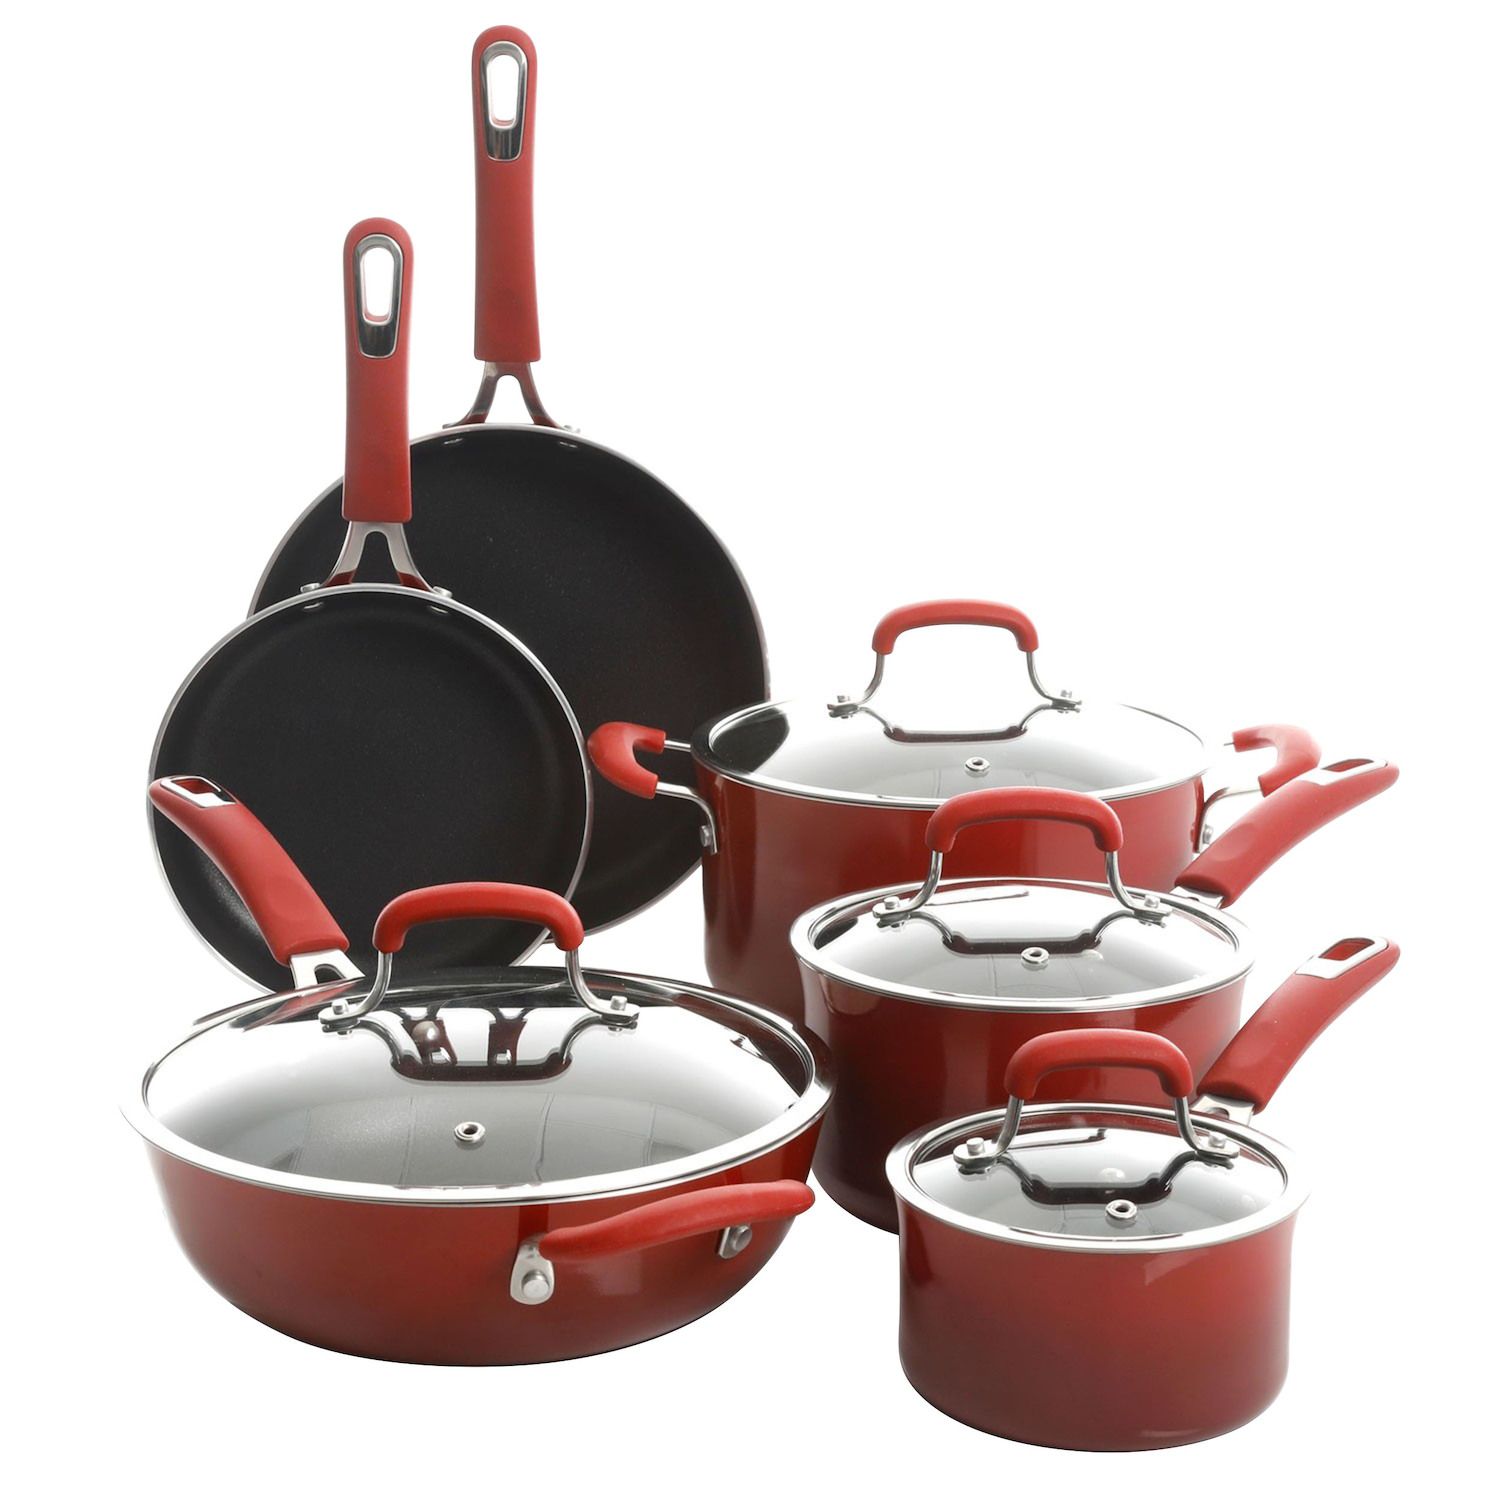 Wolfgang Puck 6-Piece Stainless Steel Pots and Pan Set; Scratch